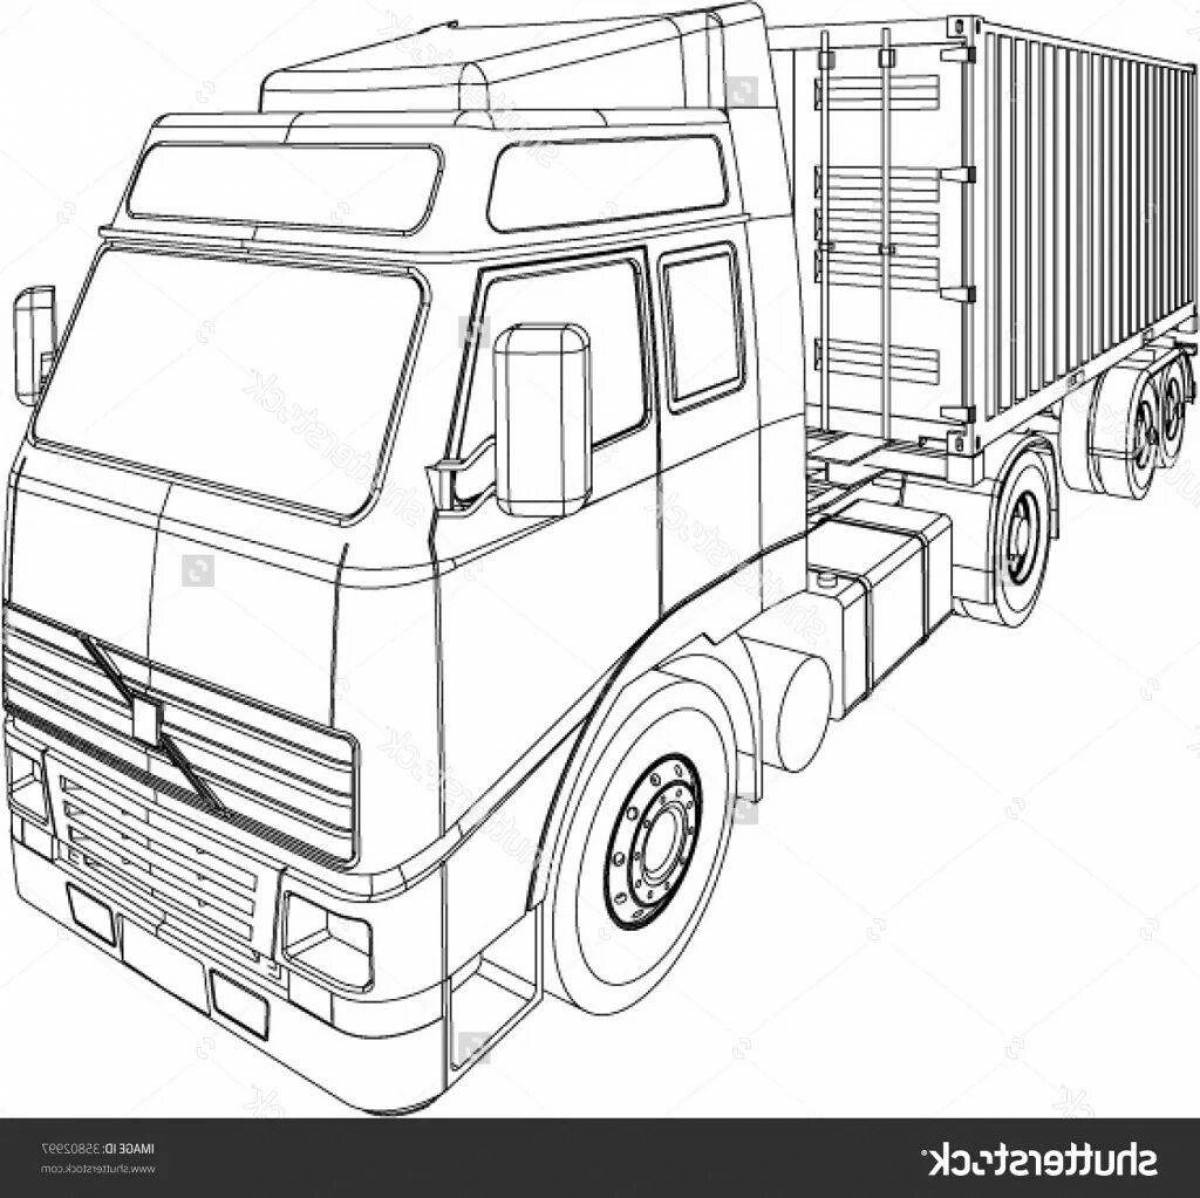 KAMAZ truck coloring page